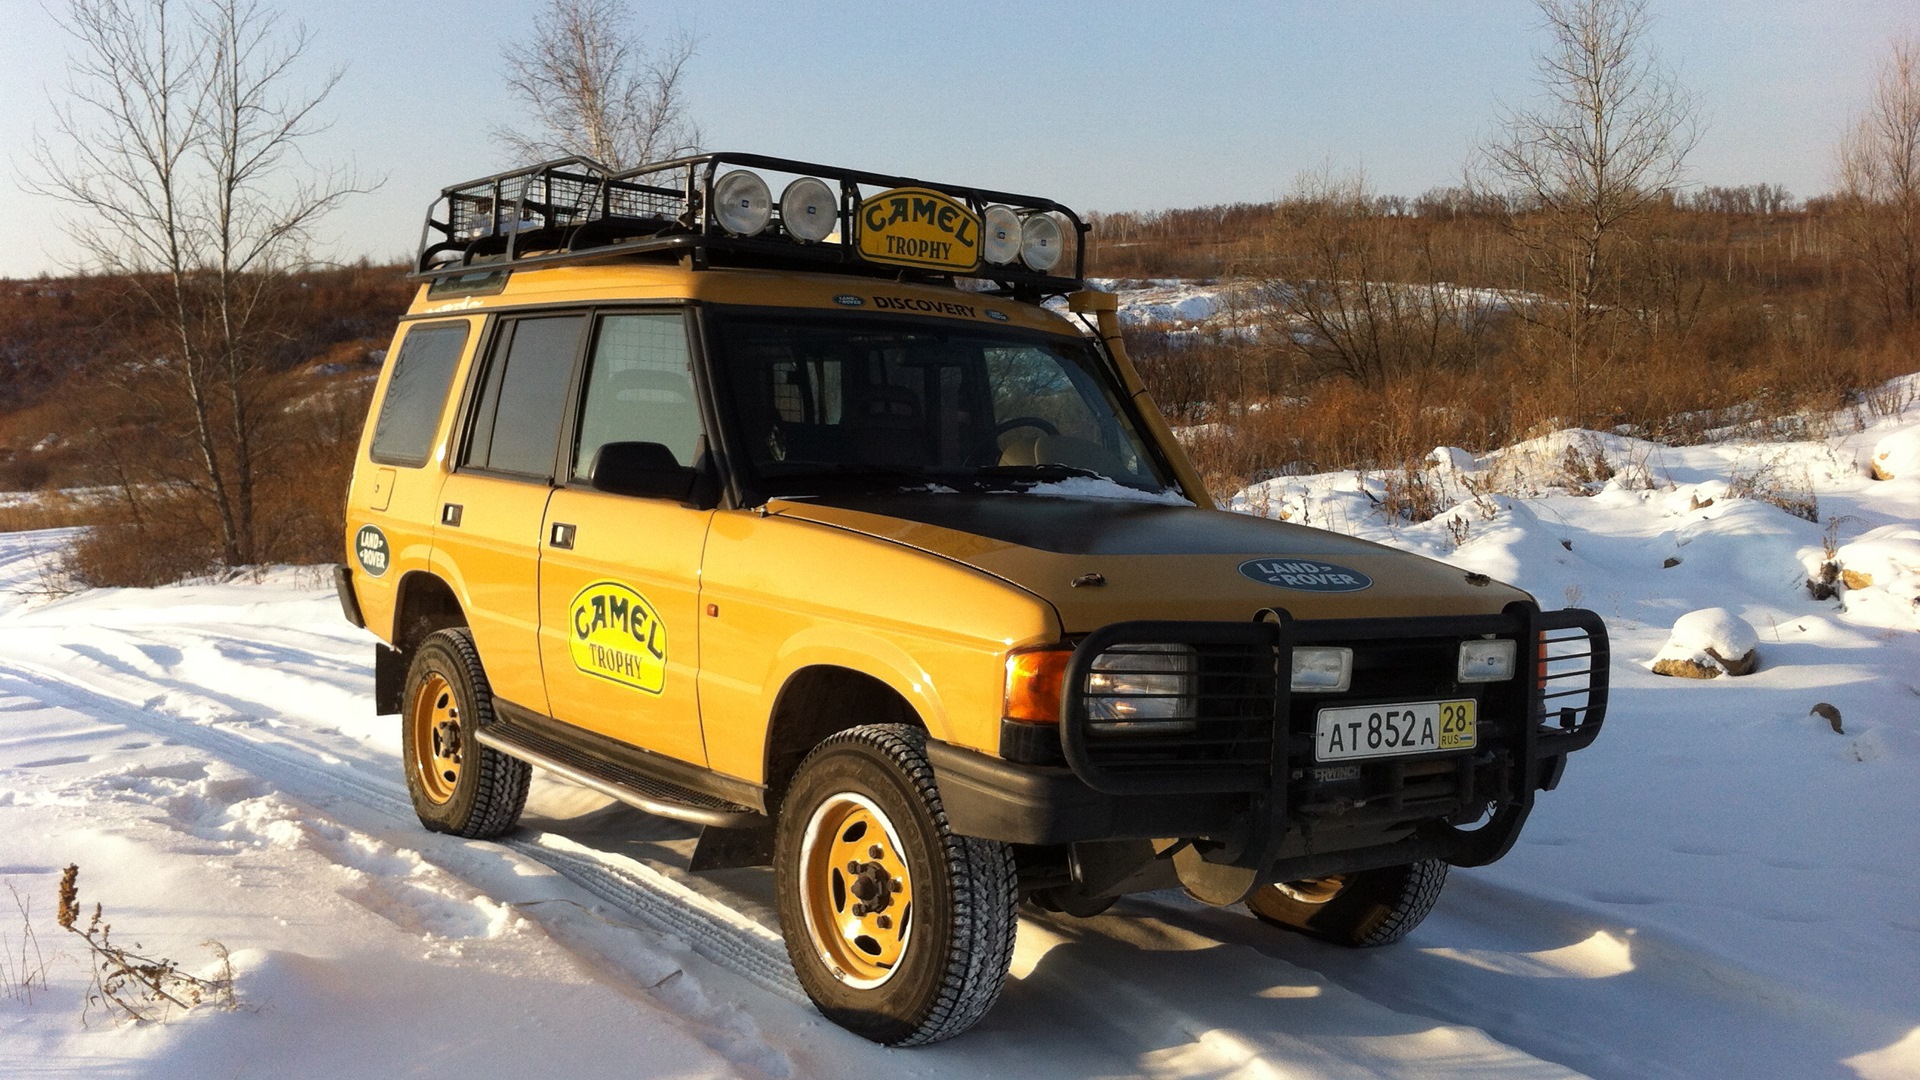 Land Rover Discovery 2 Camel Trophy. Дискавери 2 кэмел трофи. Land Rover Discovery Camel Trophy 2022. Land Rover Discovery Camel Trophy.